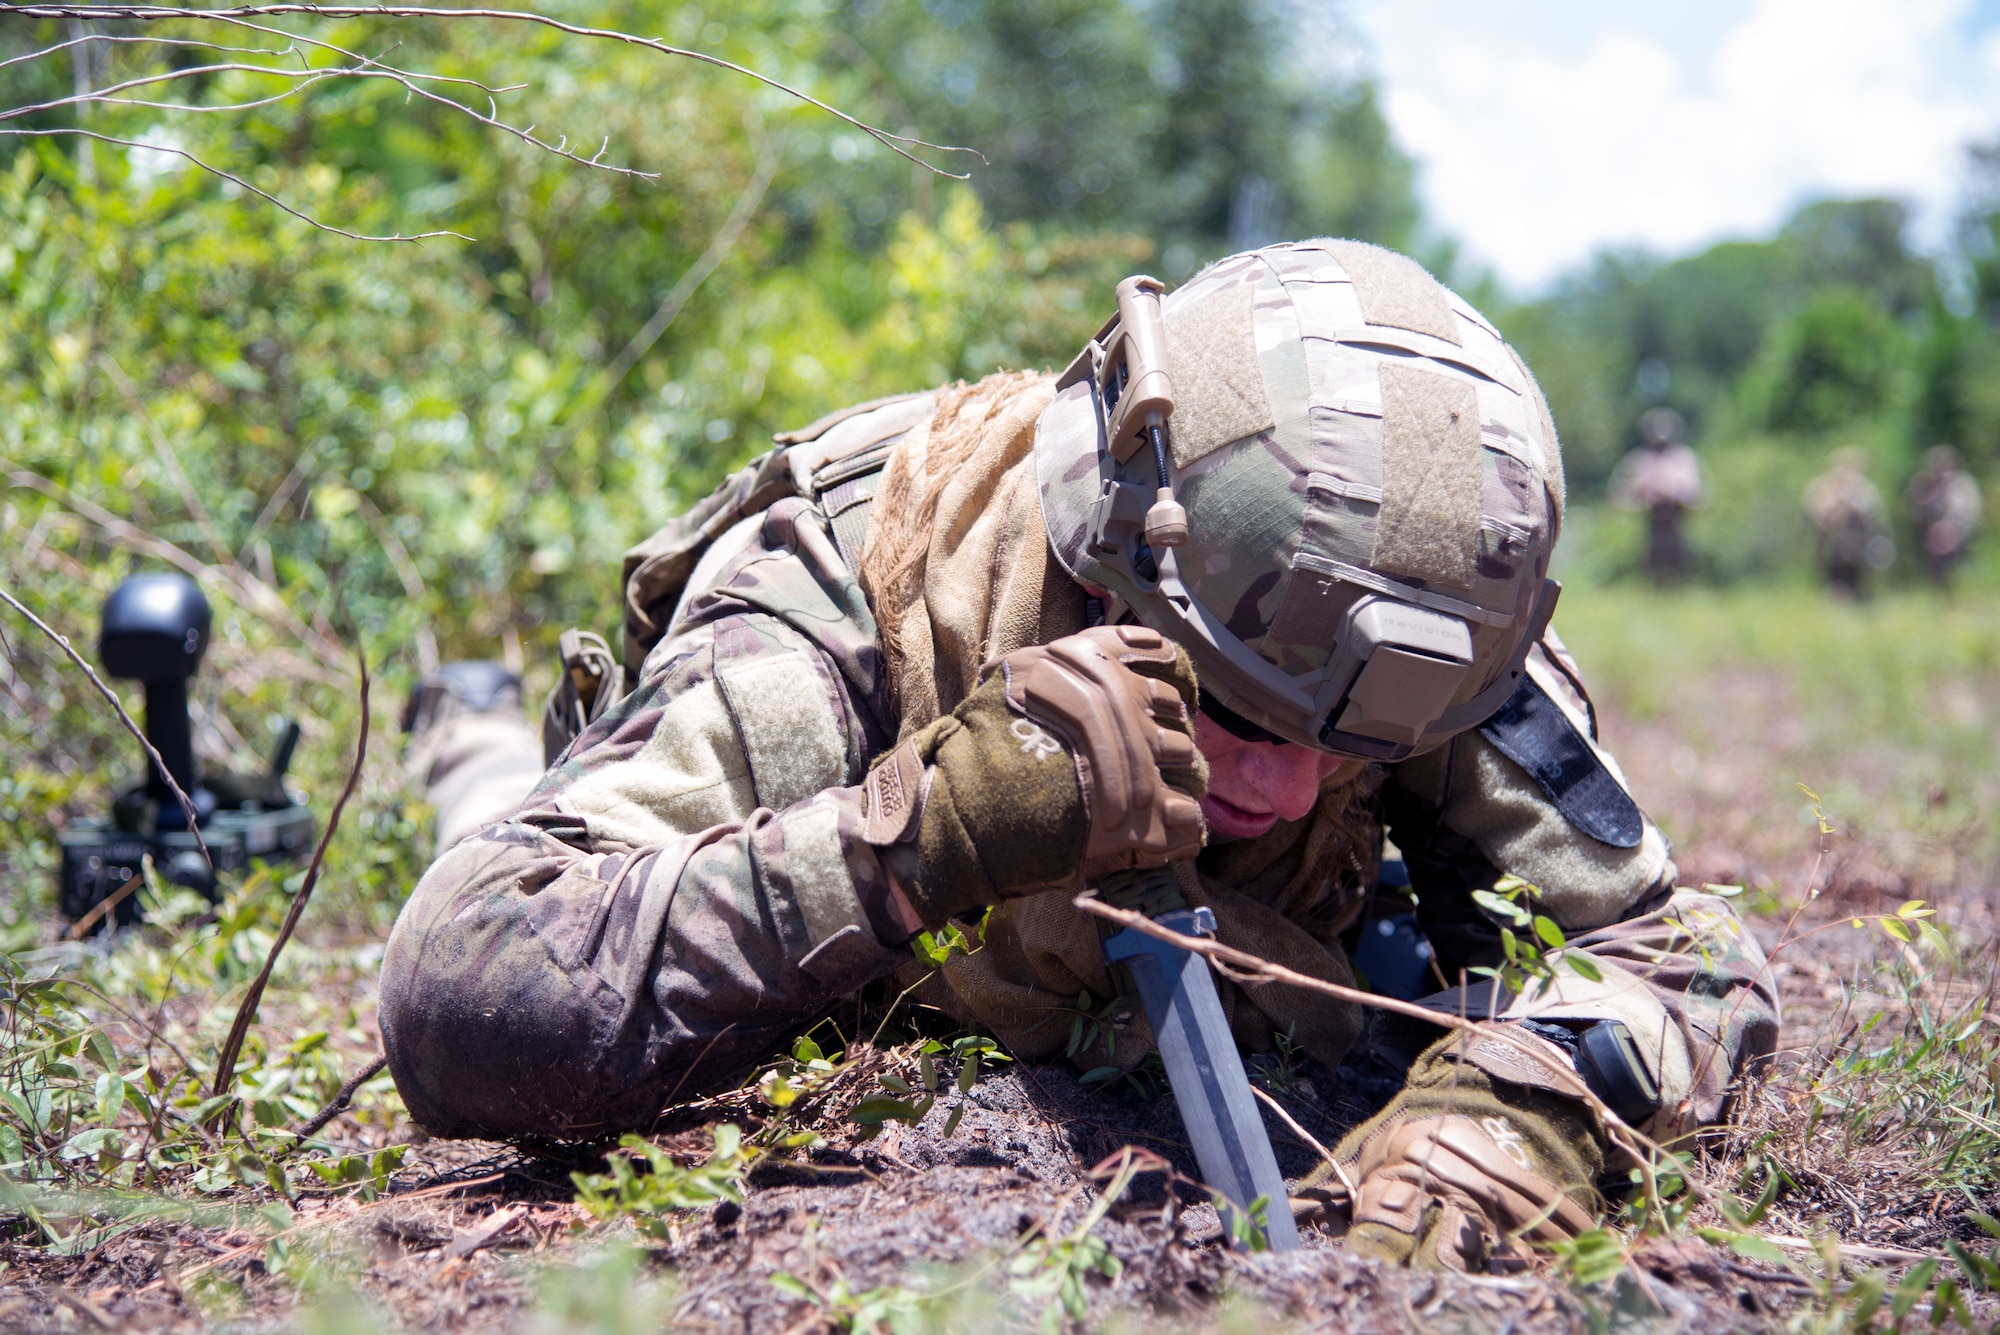 U.S. Air Force Tech. Sgt. Michael Sweeney, NCOIC of explosive ordnance disposal operations assigned to the 6th Civil Engineer Squadron, probes for a simulated improvised explosive device at MacDill Air Force Base, Fla., July 2, 2018.